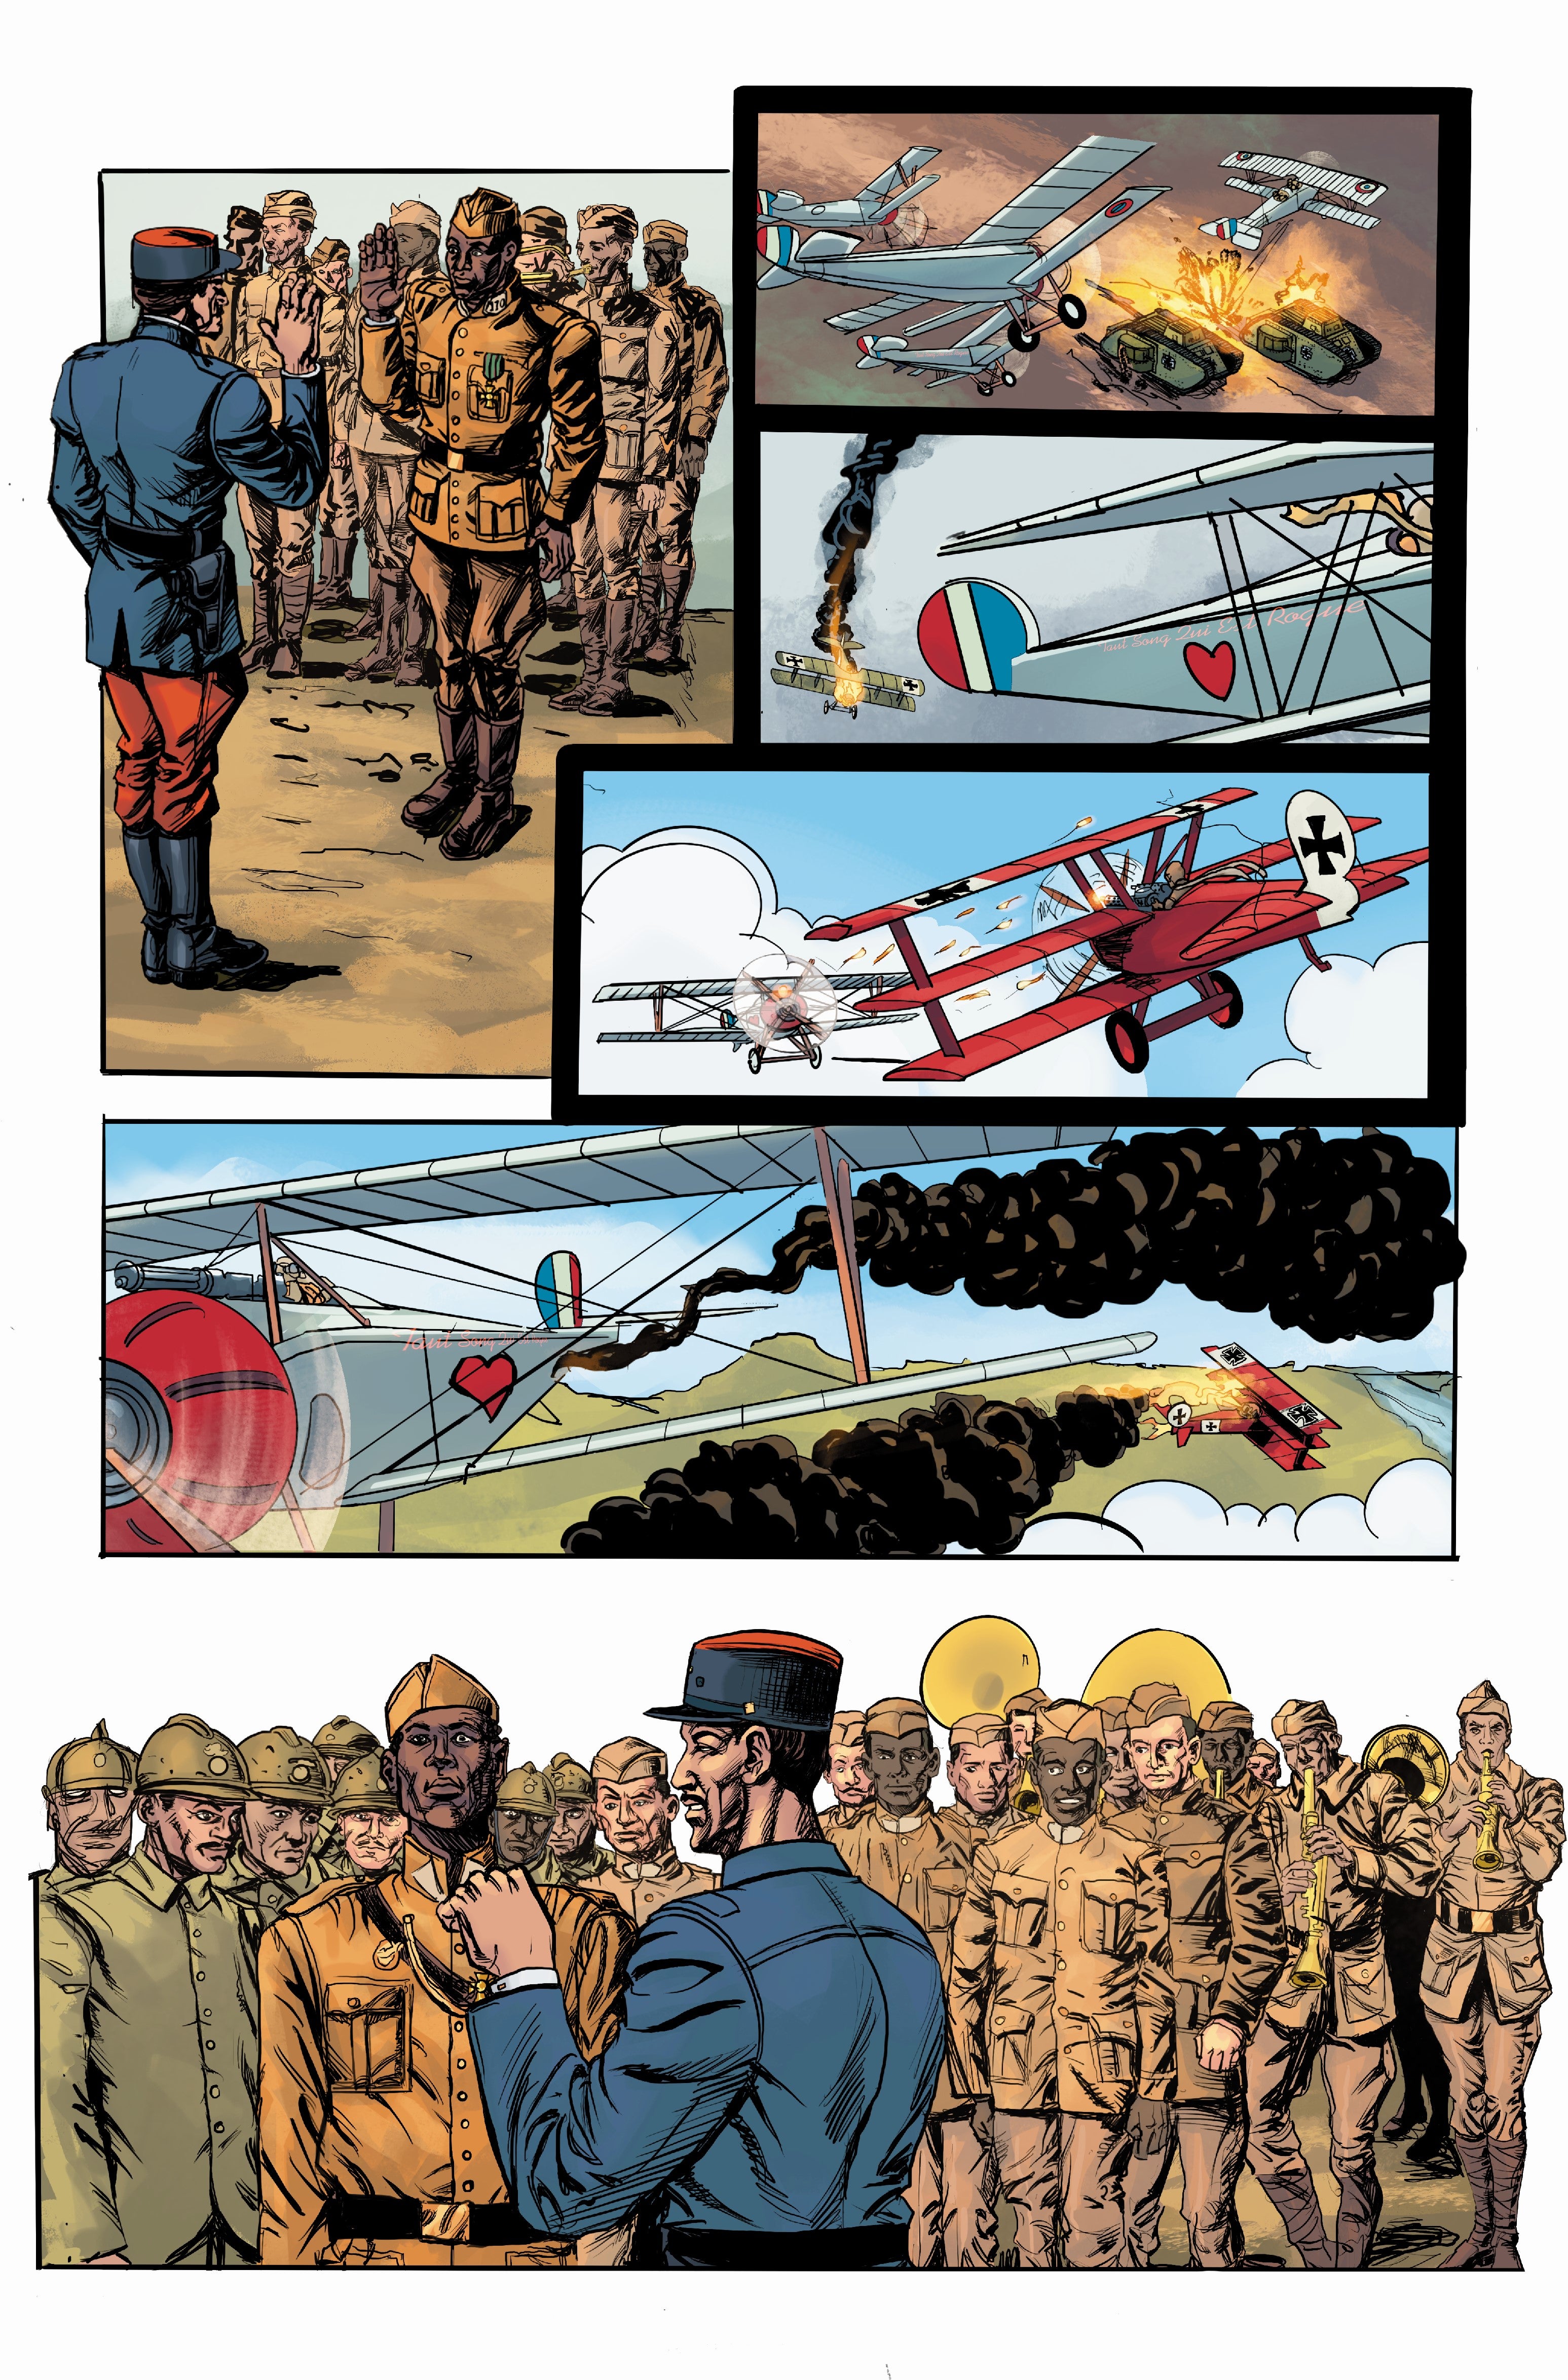 Interior page of a comic featuring soldiers and a crashing plane